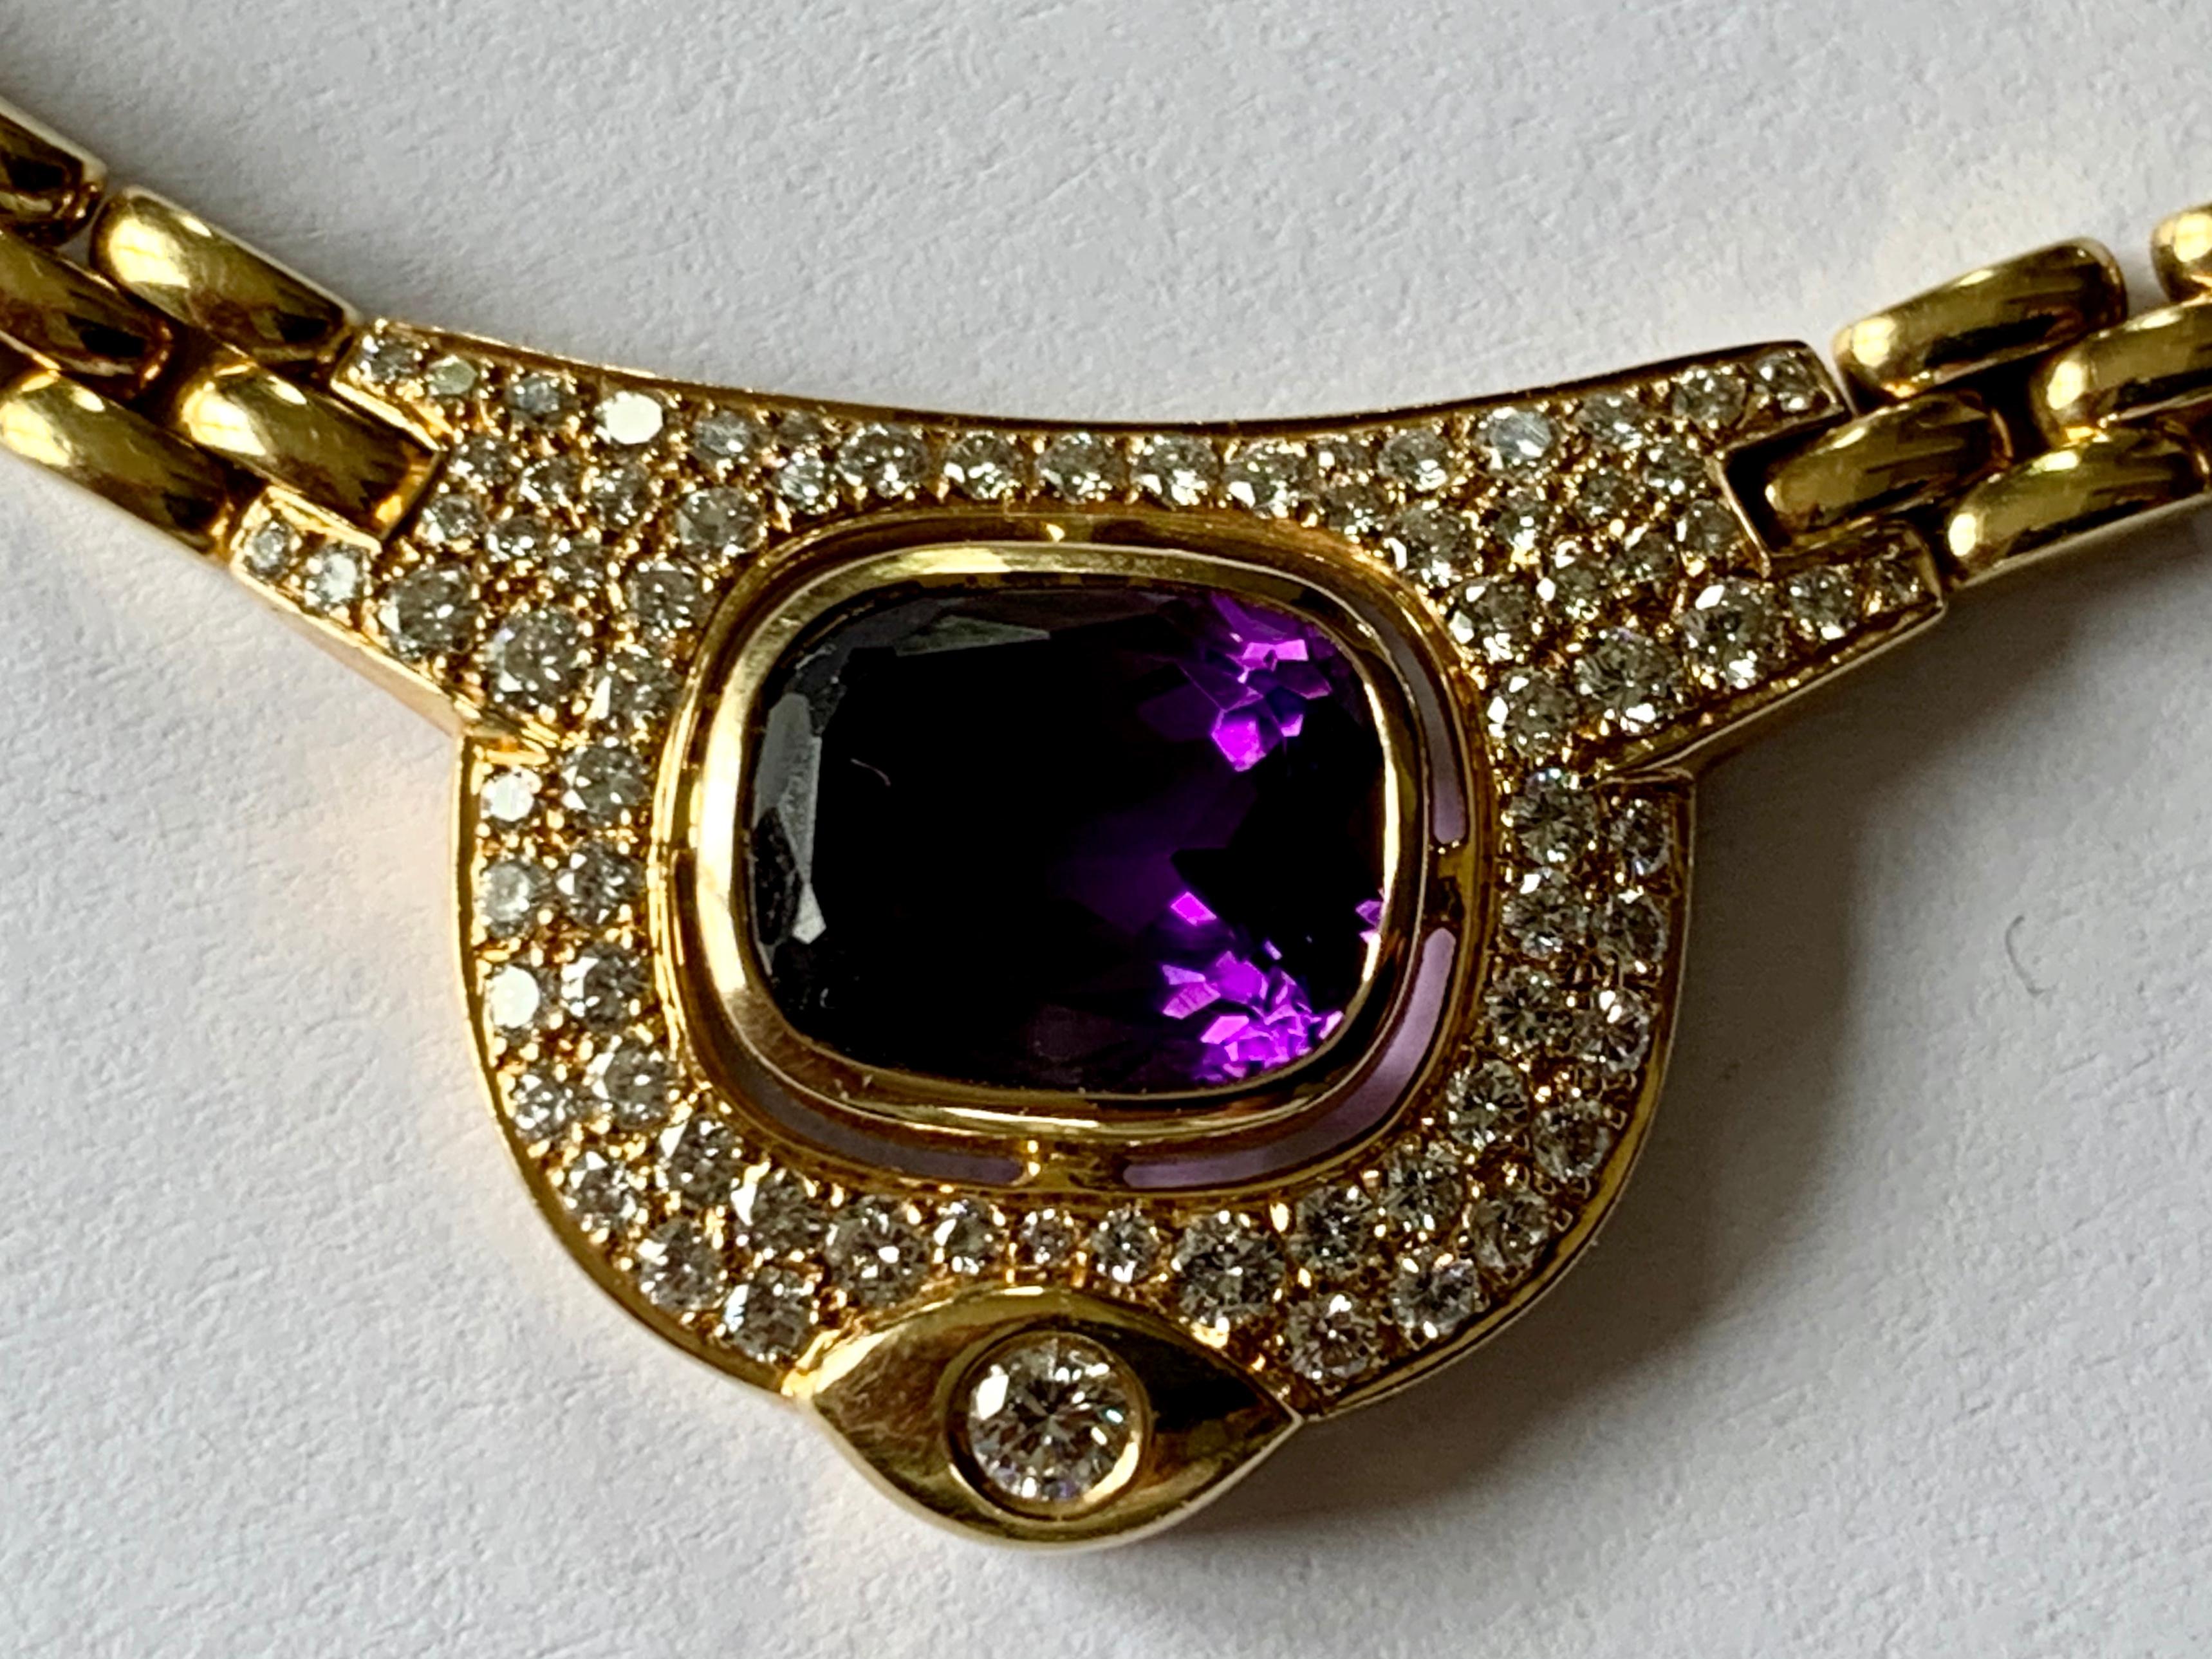 Vintage 18 K Gold Link Chain Necklace with Amethyst and Diamonds by Kurz Zurich For Sale 4